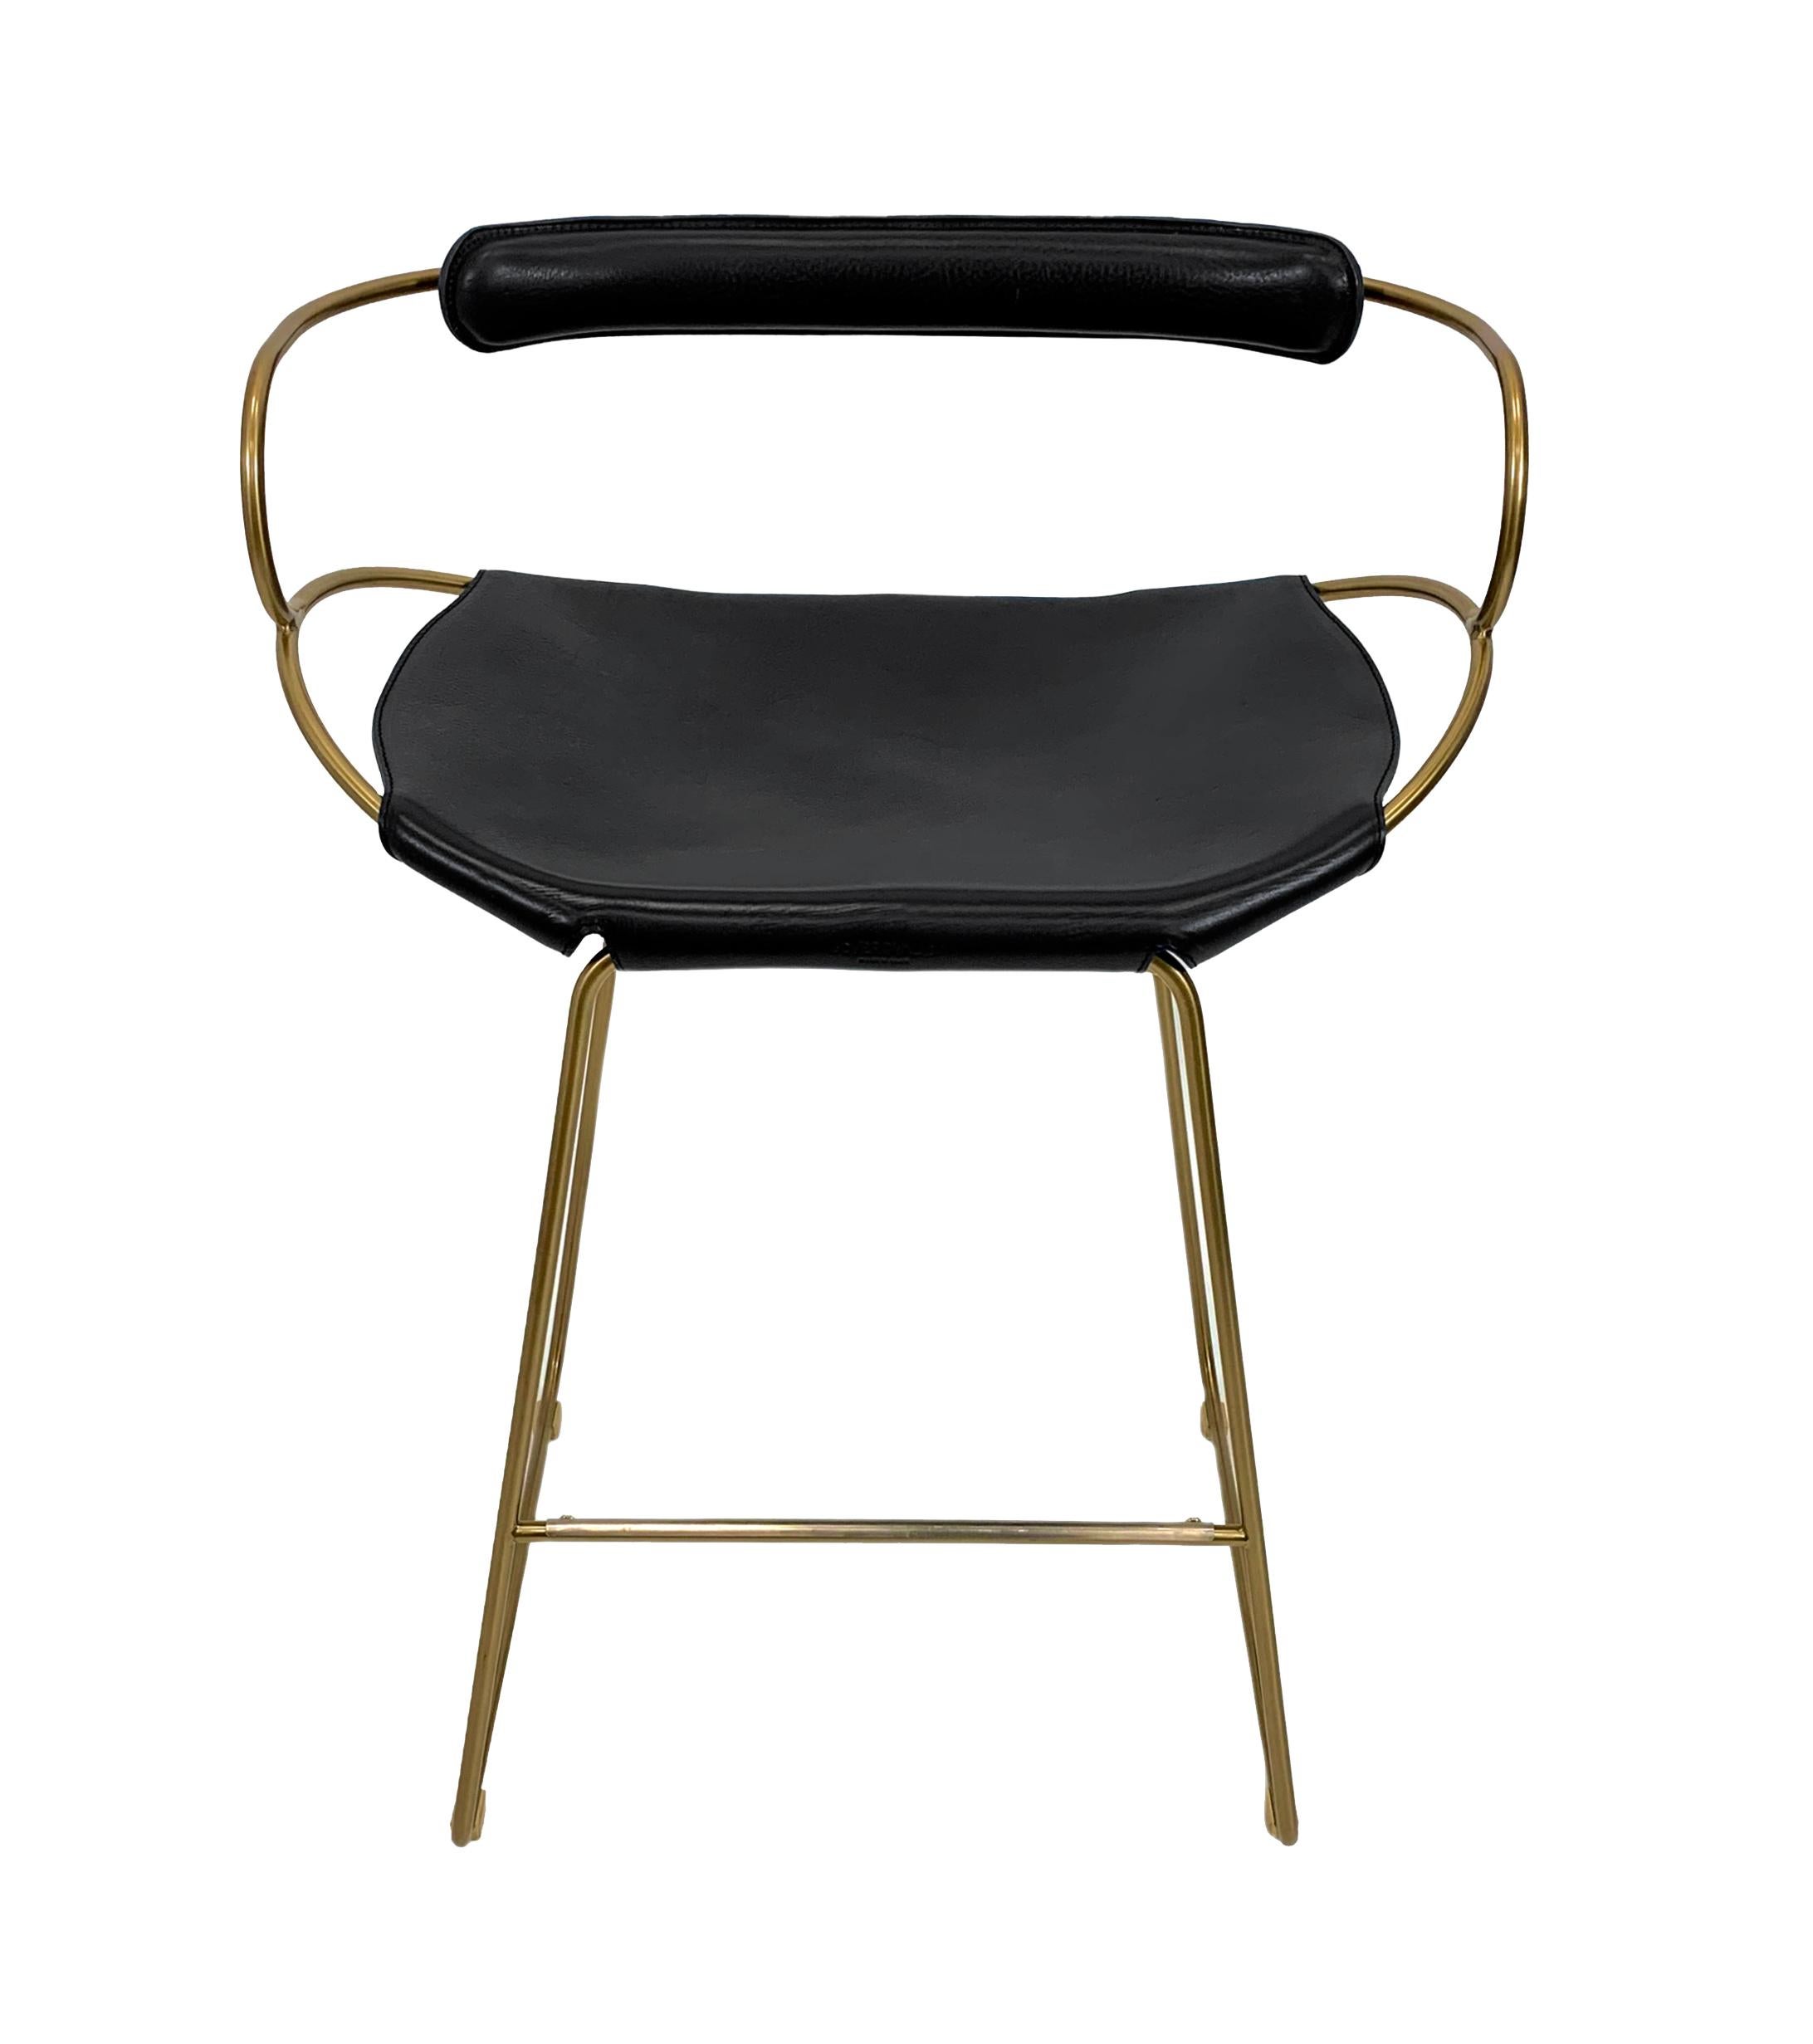 HUG arm counter stool aged brass steel and vegetable tanned black saddler leather

The HUG arm counter stool is designed and conceived with a light aesthetic, the slight oscillation of the steel rod of 14 mm is complemented by the flexibility of the